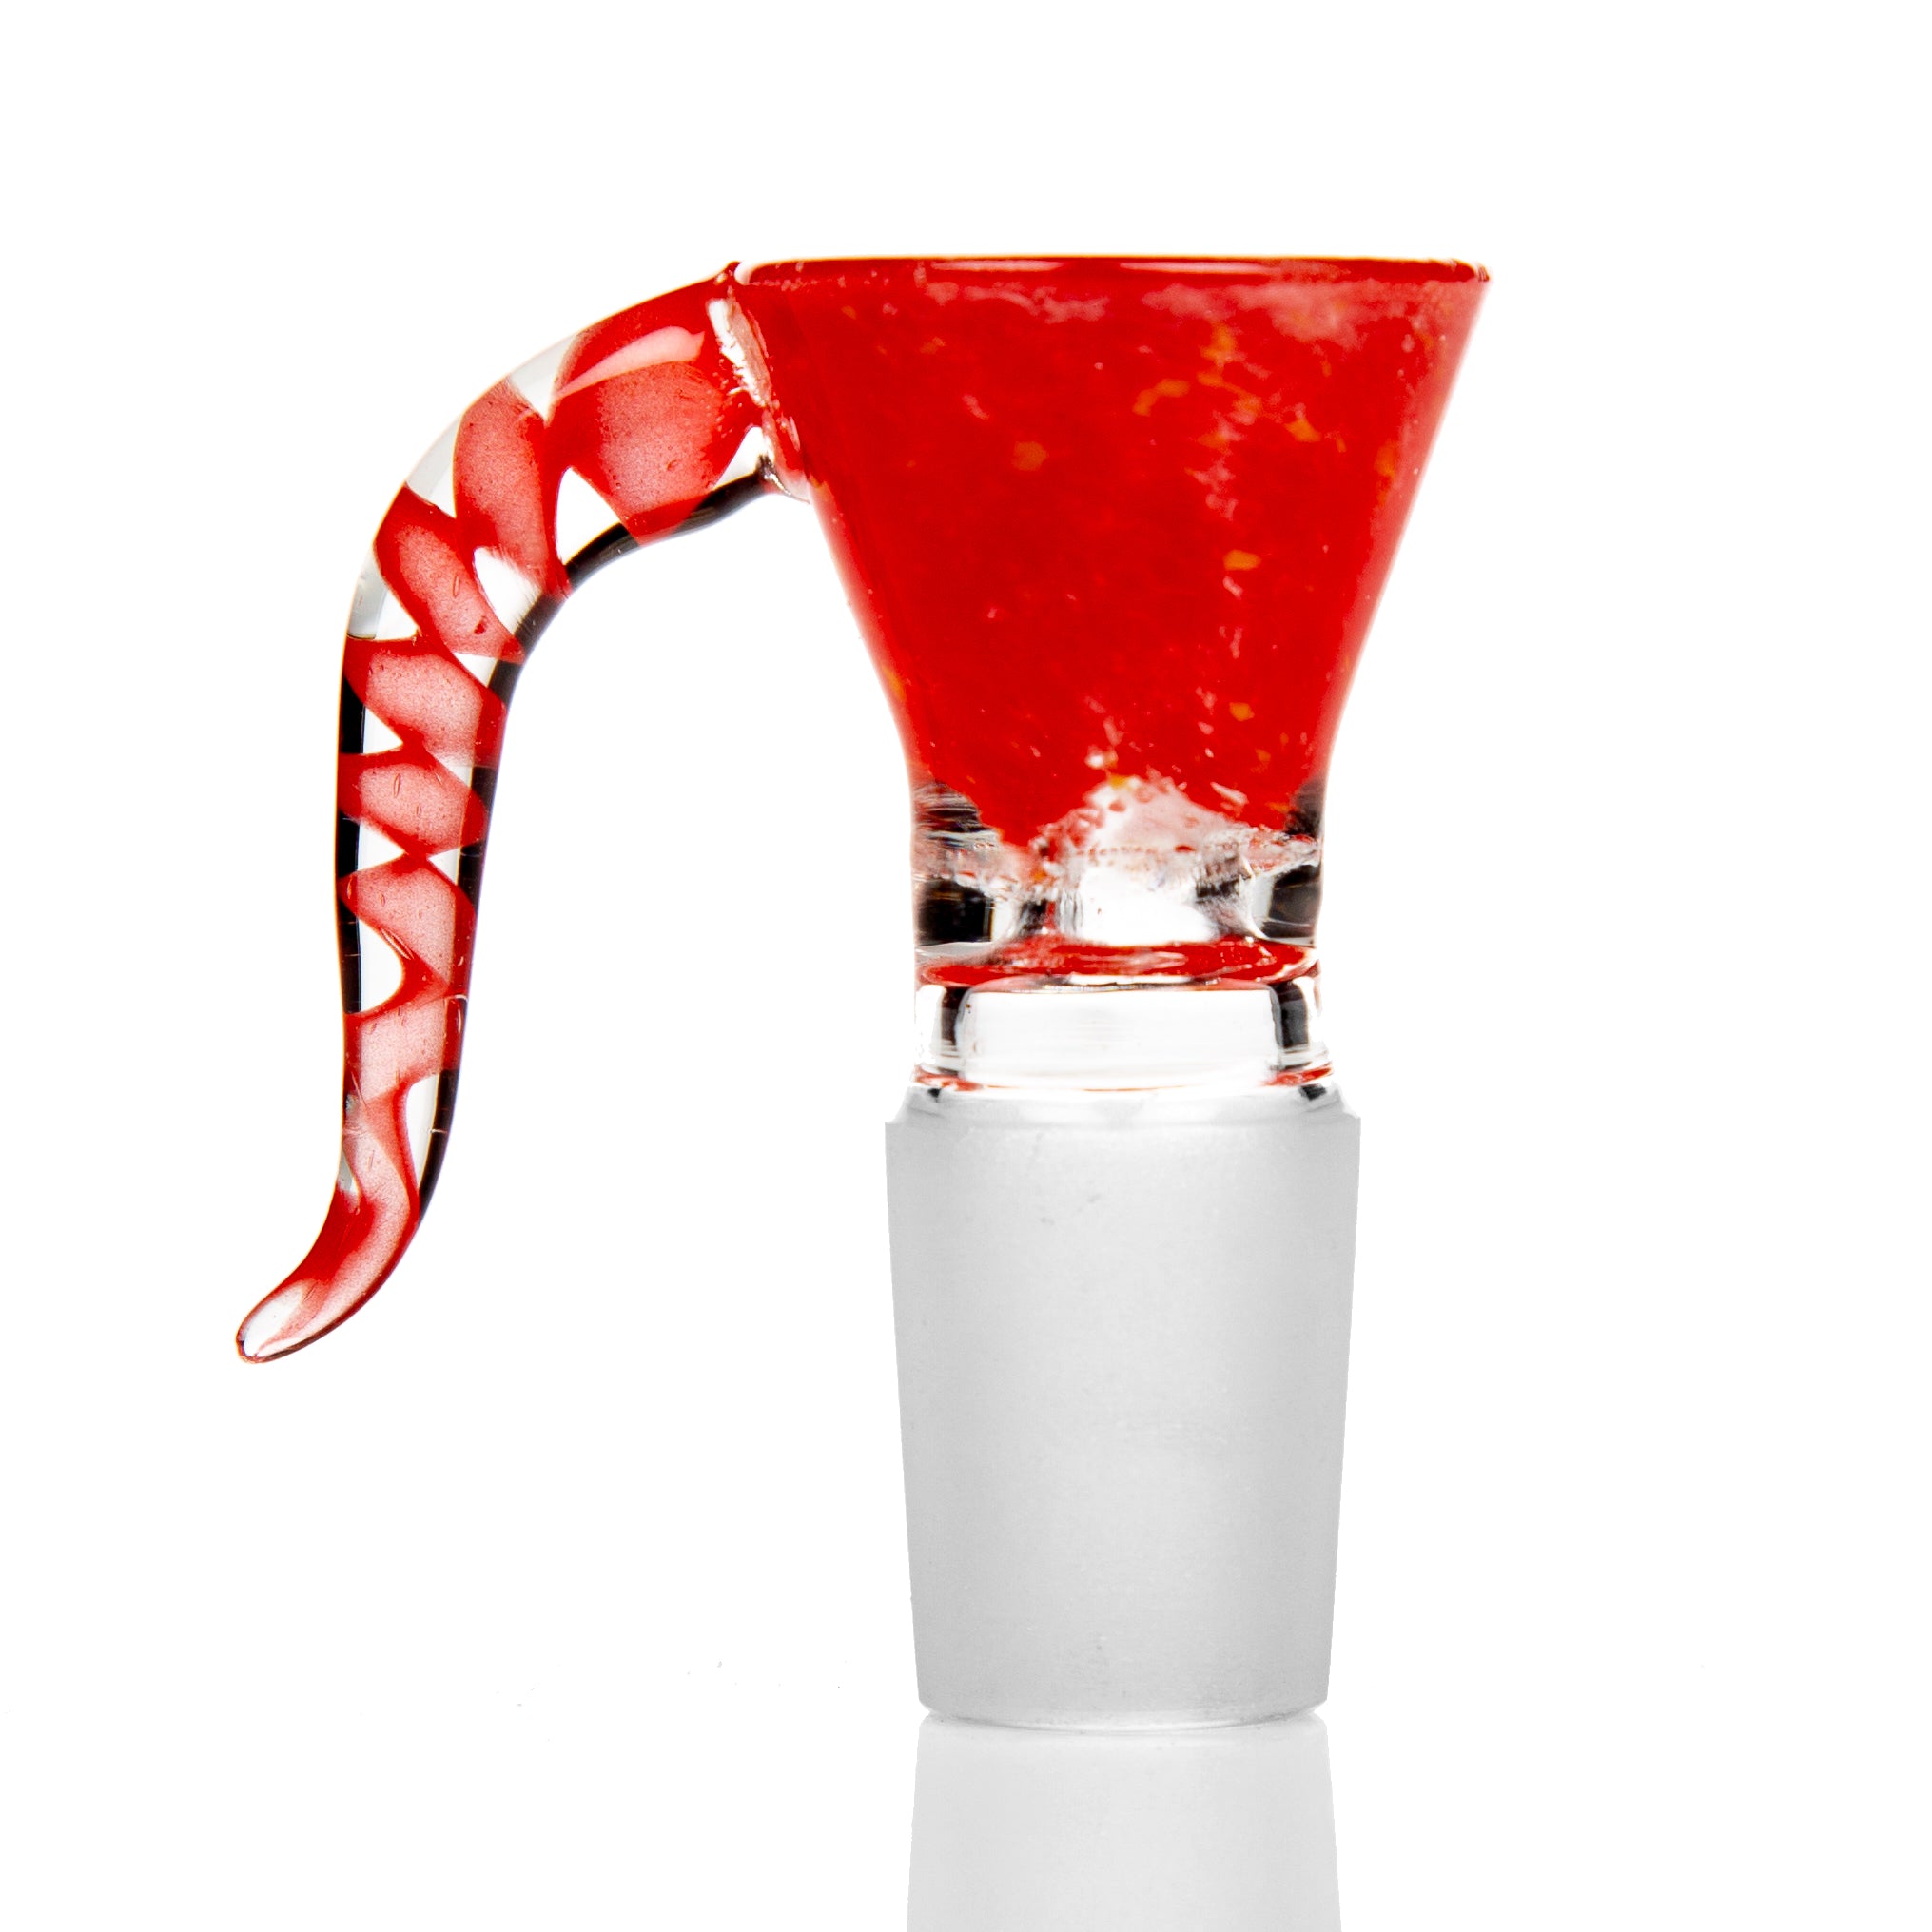 18mm red glass cone piece for glass bongs.